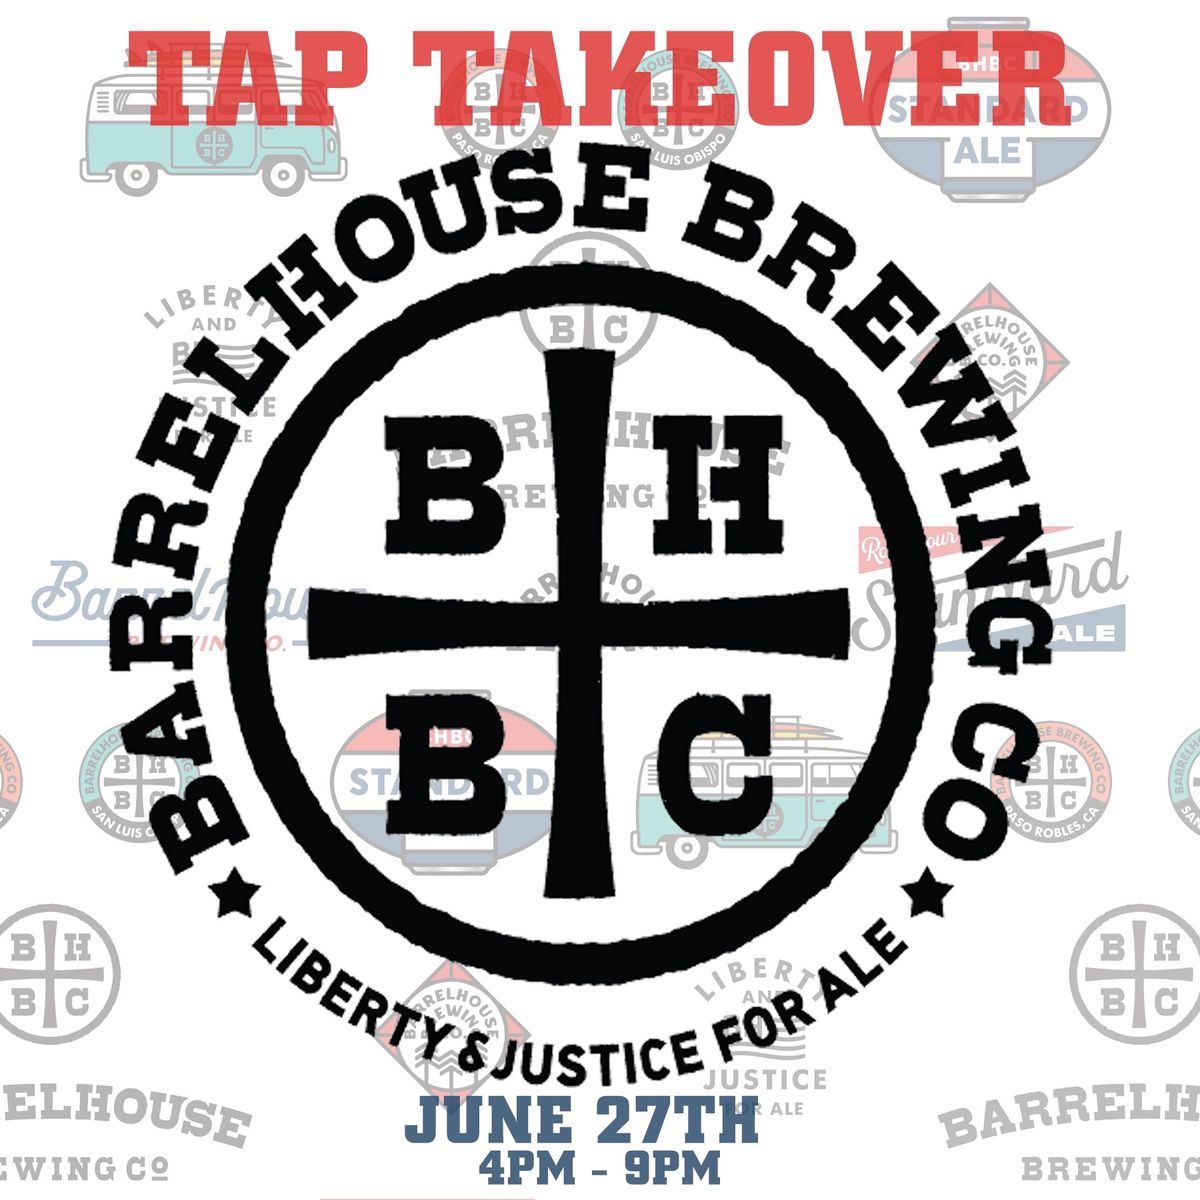 Barrelhouse Brewing Tap Takeover